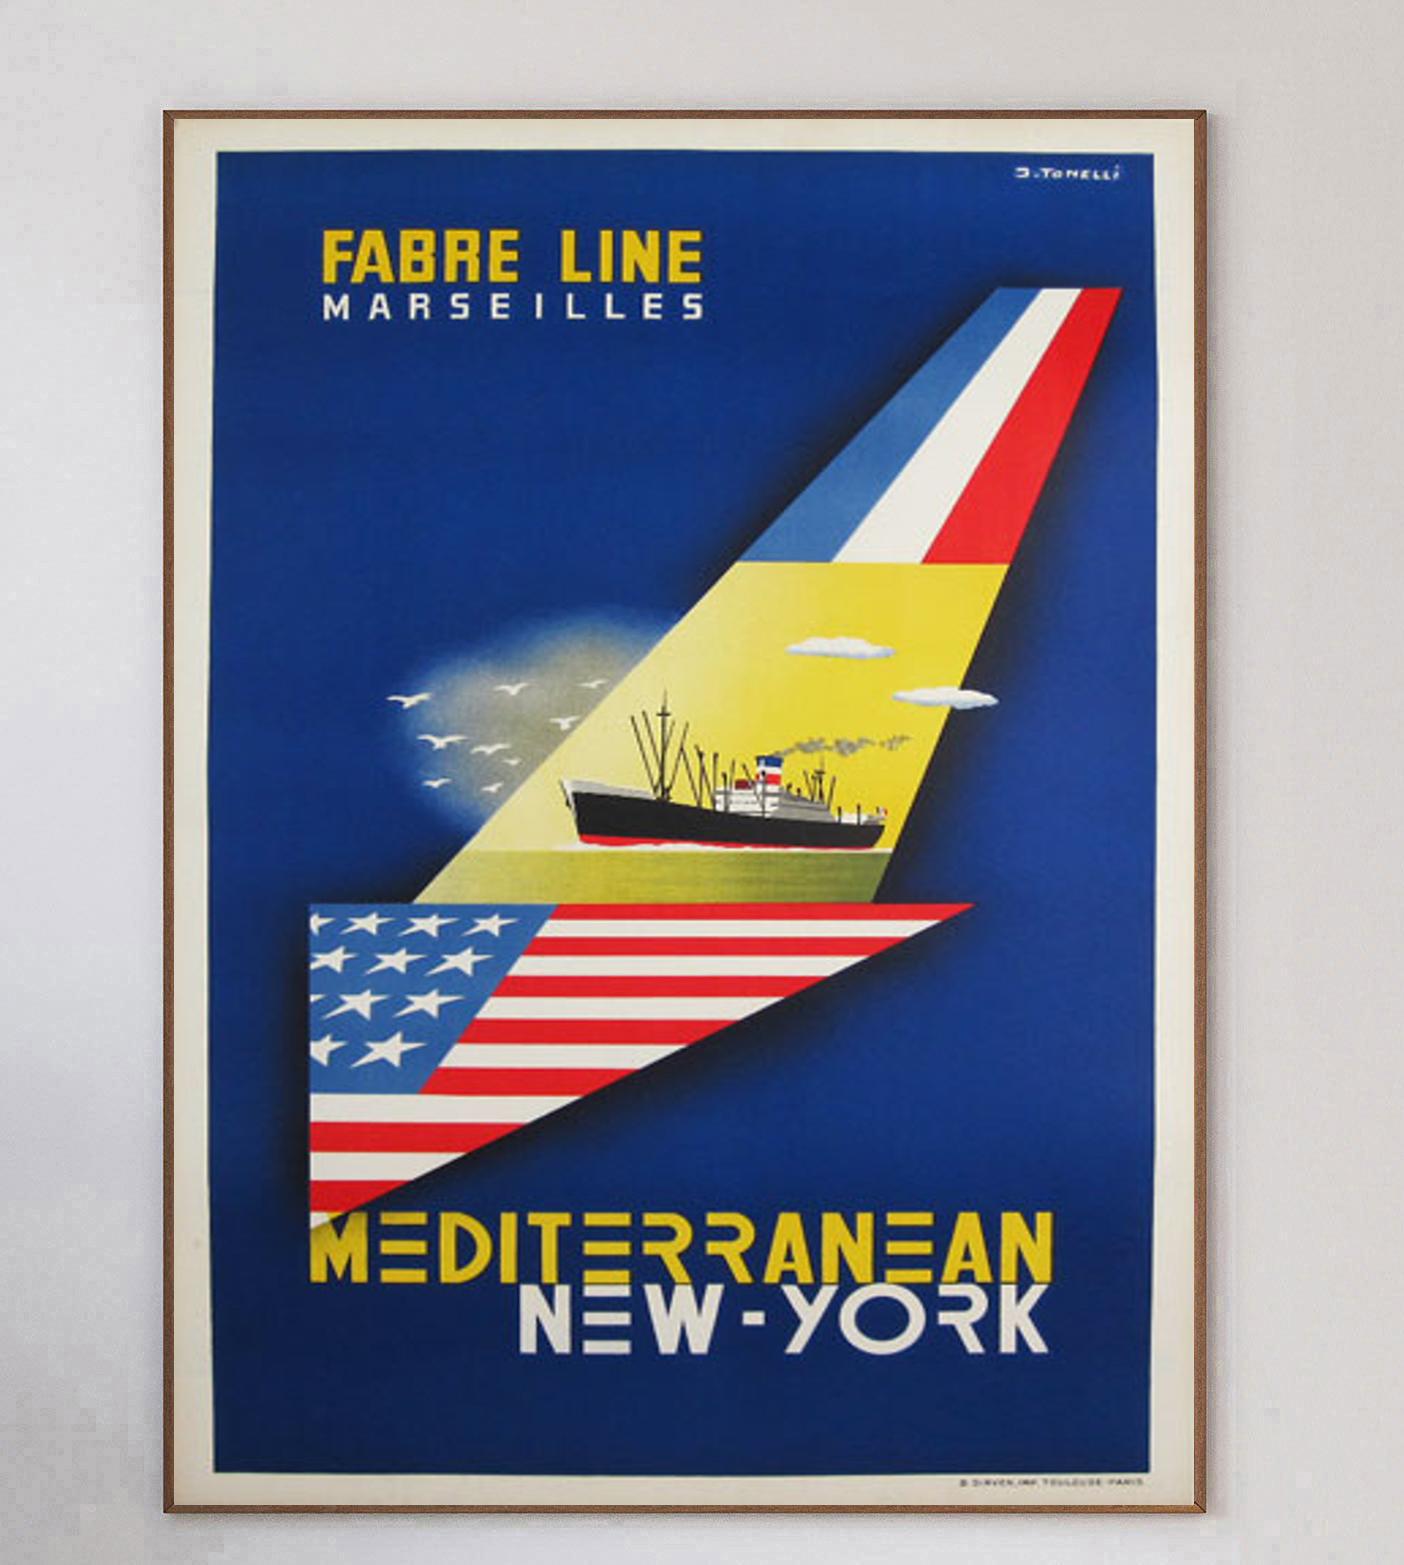 This gorgeous & rare poster for SNCF was designed by the iconic poster and graphic designer Bernard Villemot. Best known for his collaborations with the likes of Bally, Air France and Perrier, he is known as one of the greatest commercial artists of